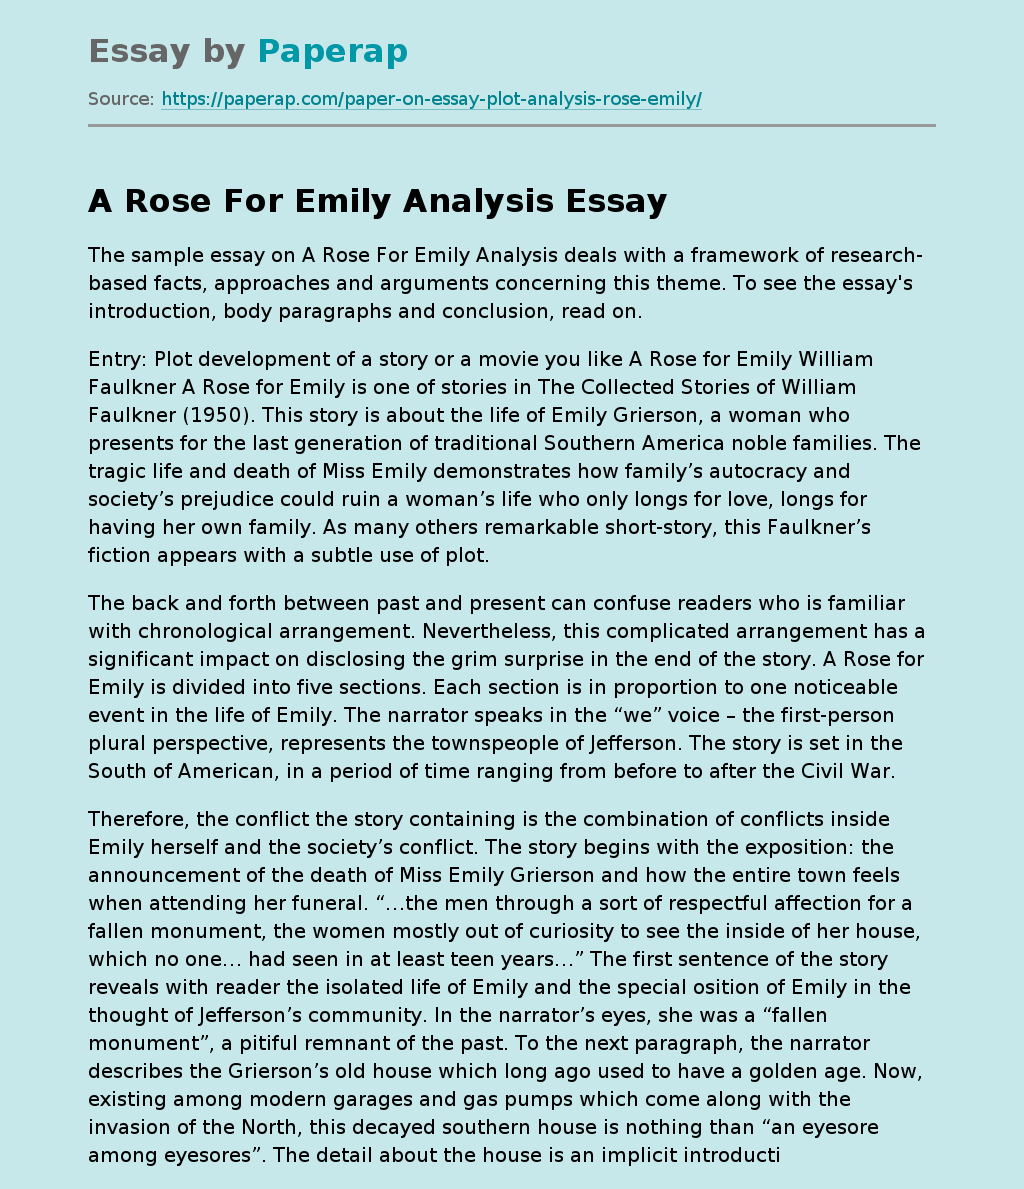 A Rose For Emily Analysis